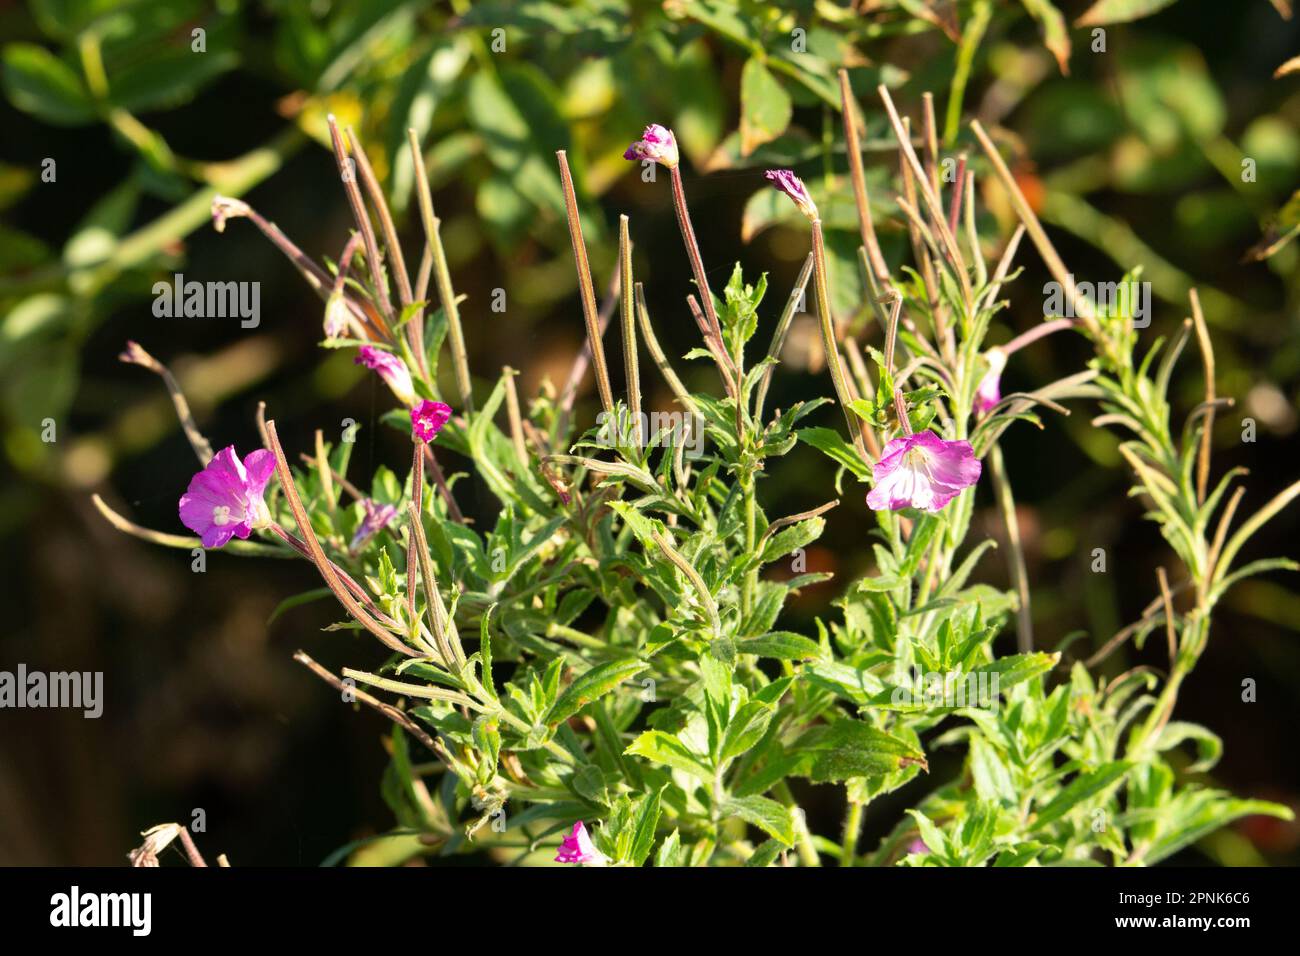 pink flowers and leaves of Hairy Giant Willowherb (Epilobium hirsutum) isolated on a natural green summer woodland background Stock Photo